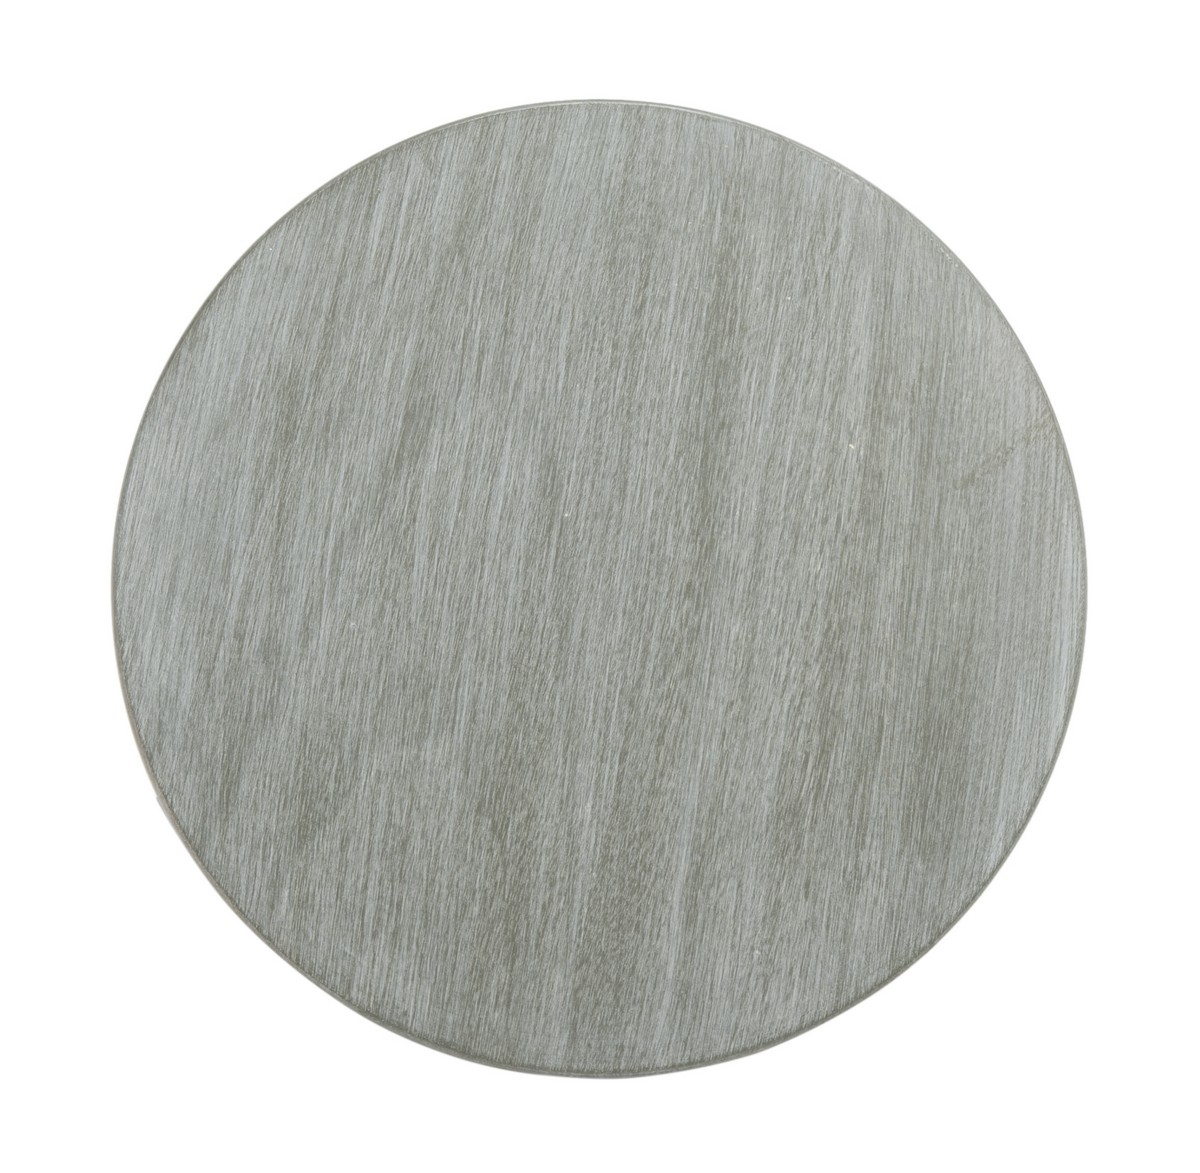 Orion Round Accent Table - Slate/Grey - Arlo Home - Image 3